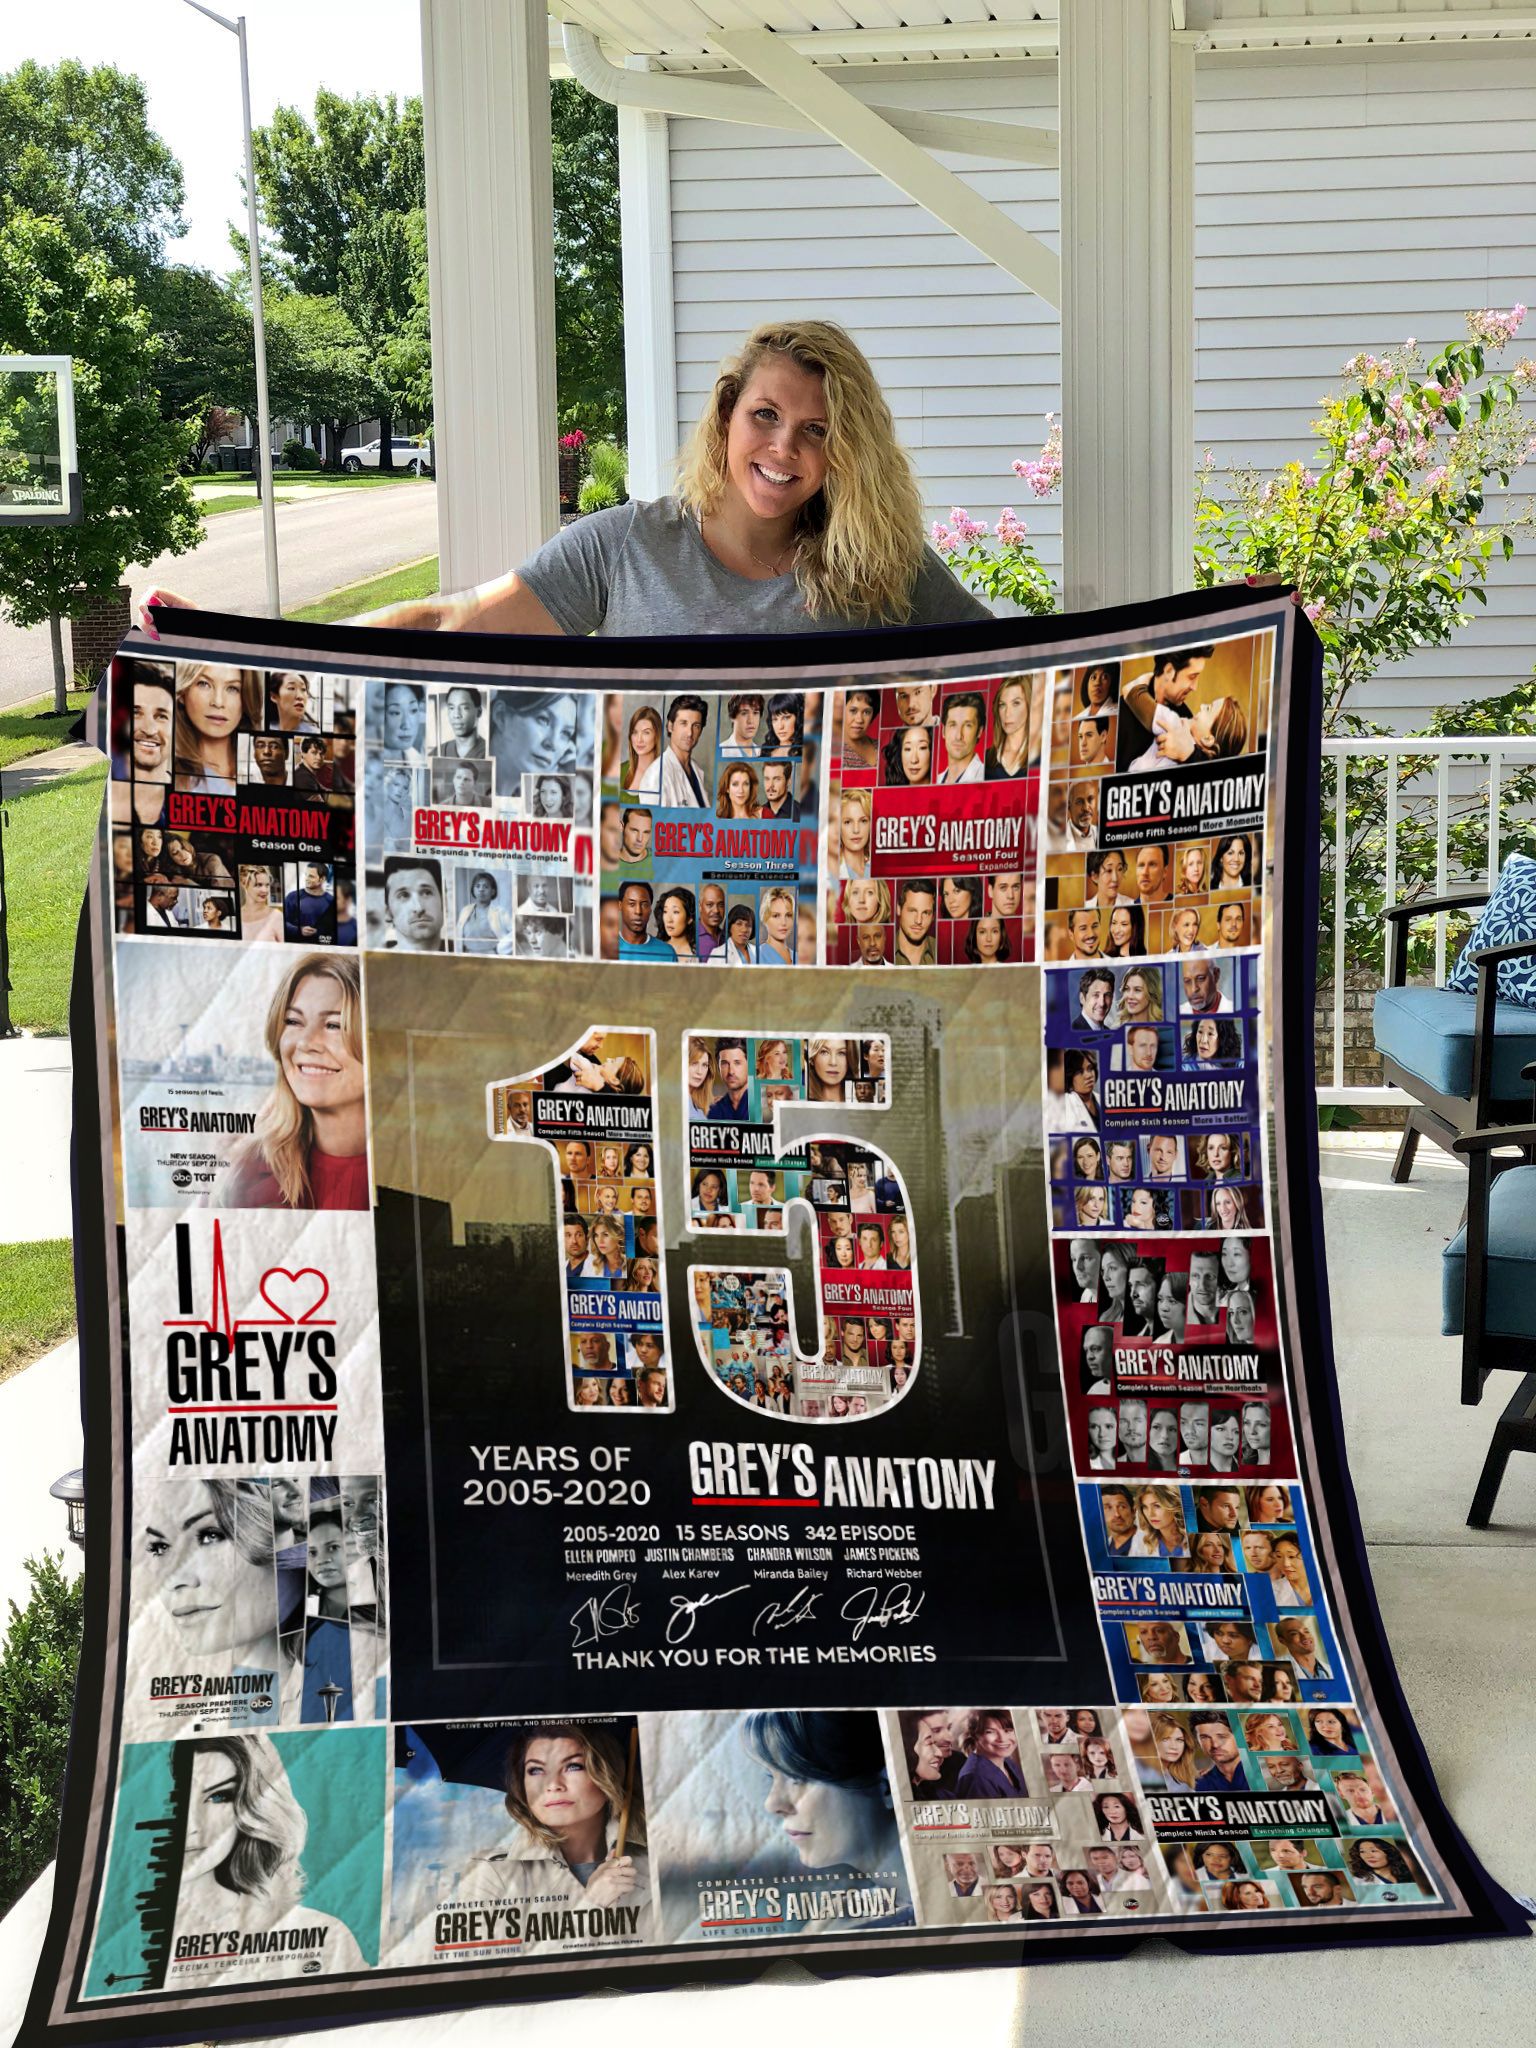 15 Years Of Grey’s Anatomy 2005-2020 Thank You For The Memories Signatures Quilt Blanket